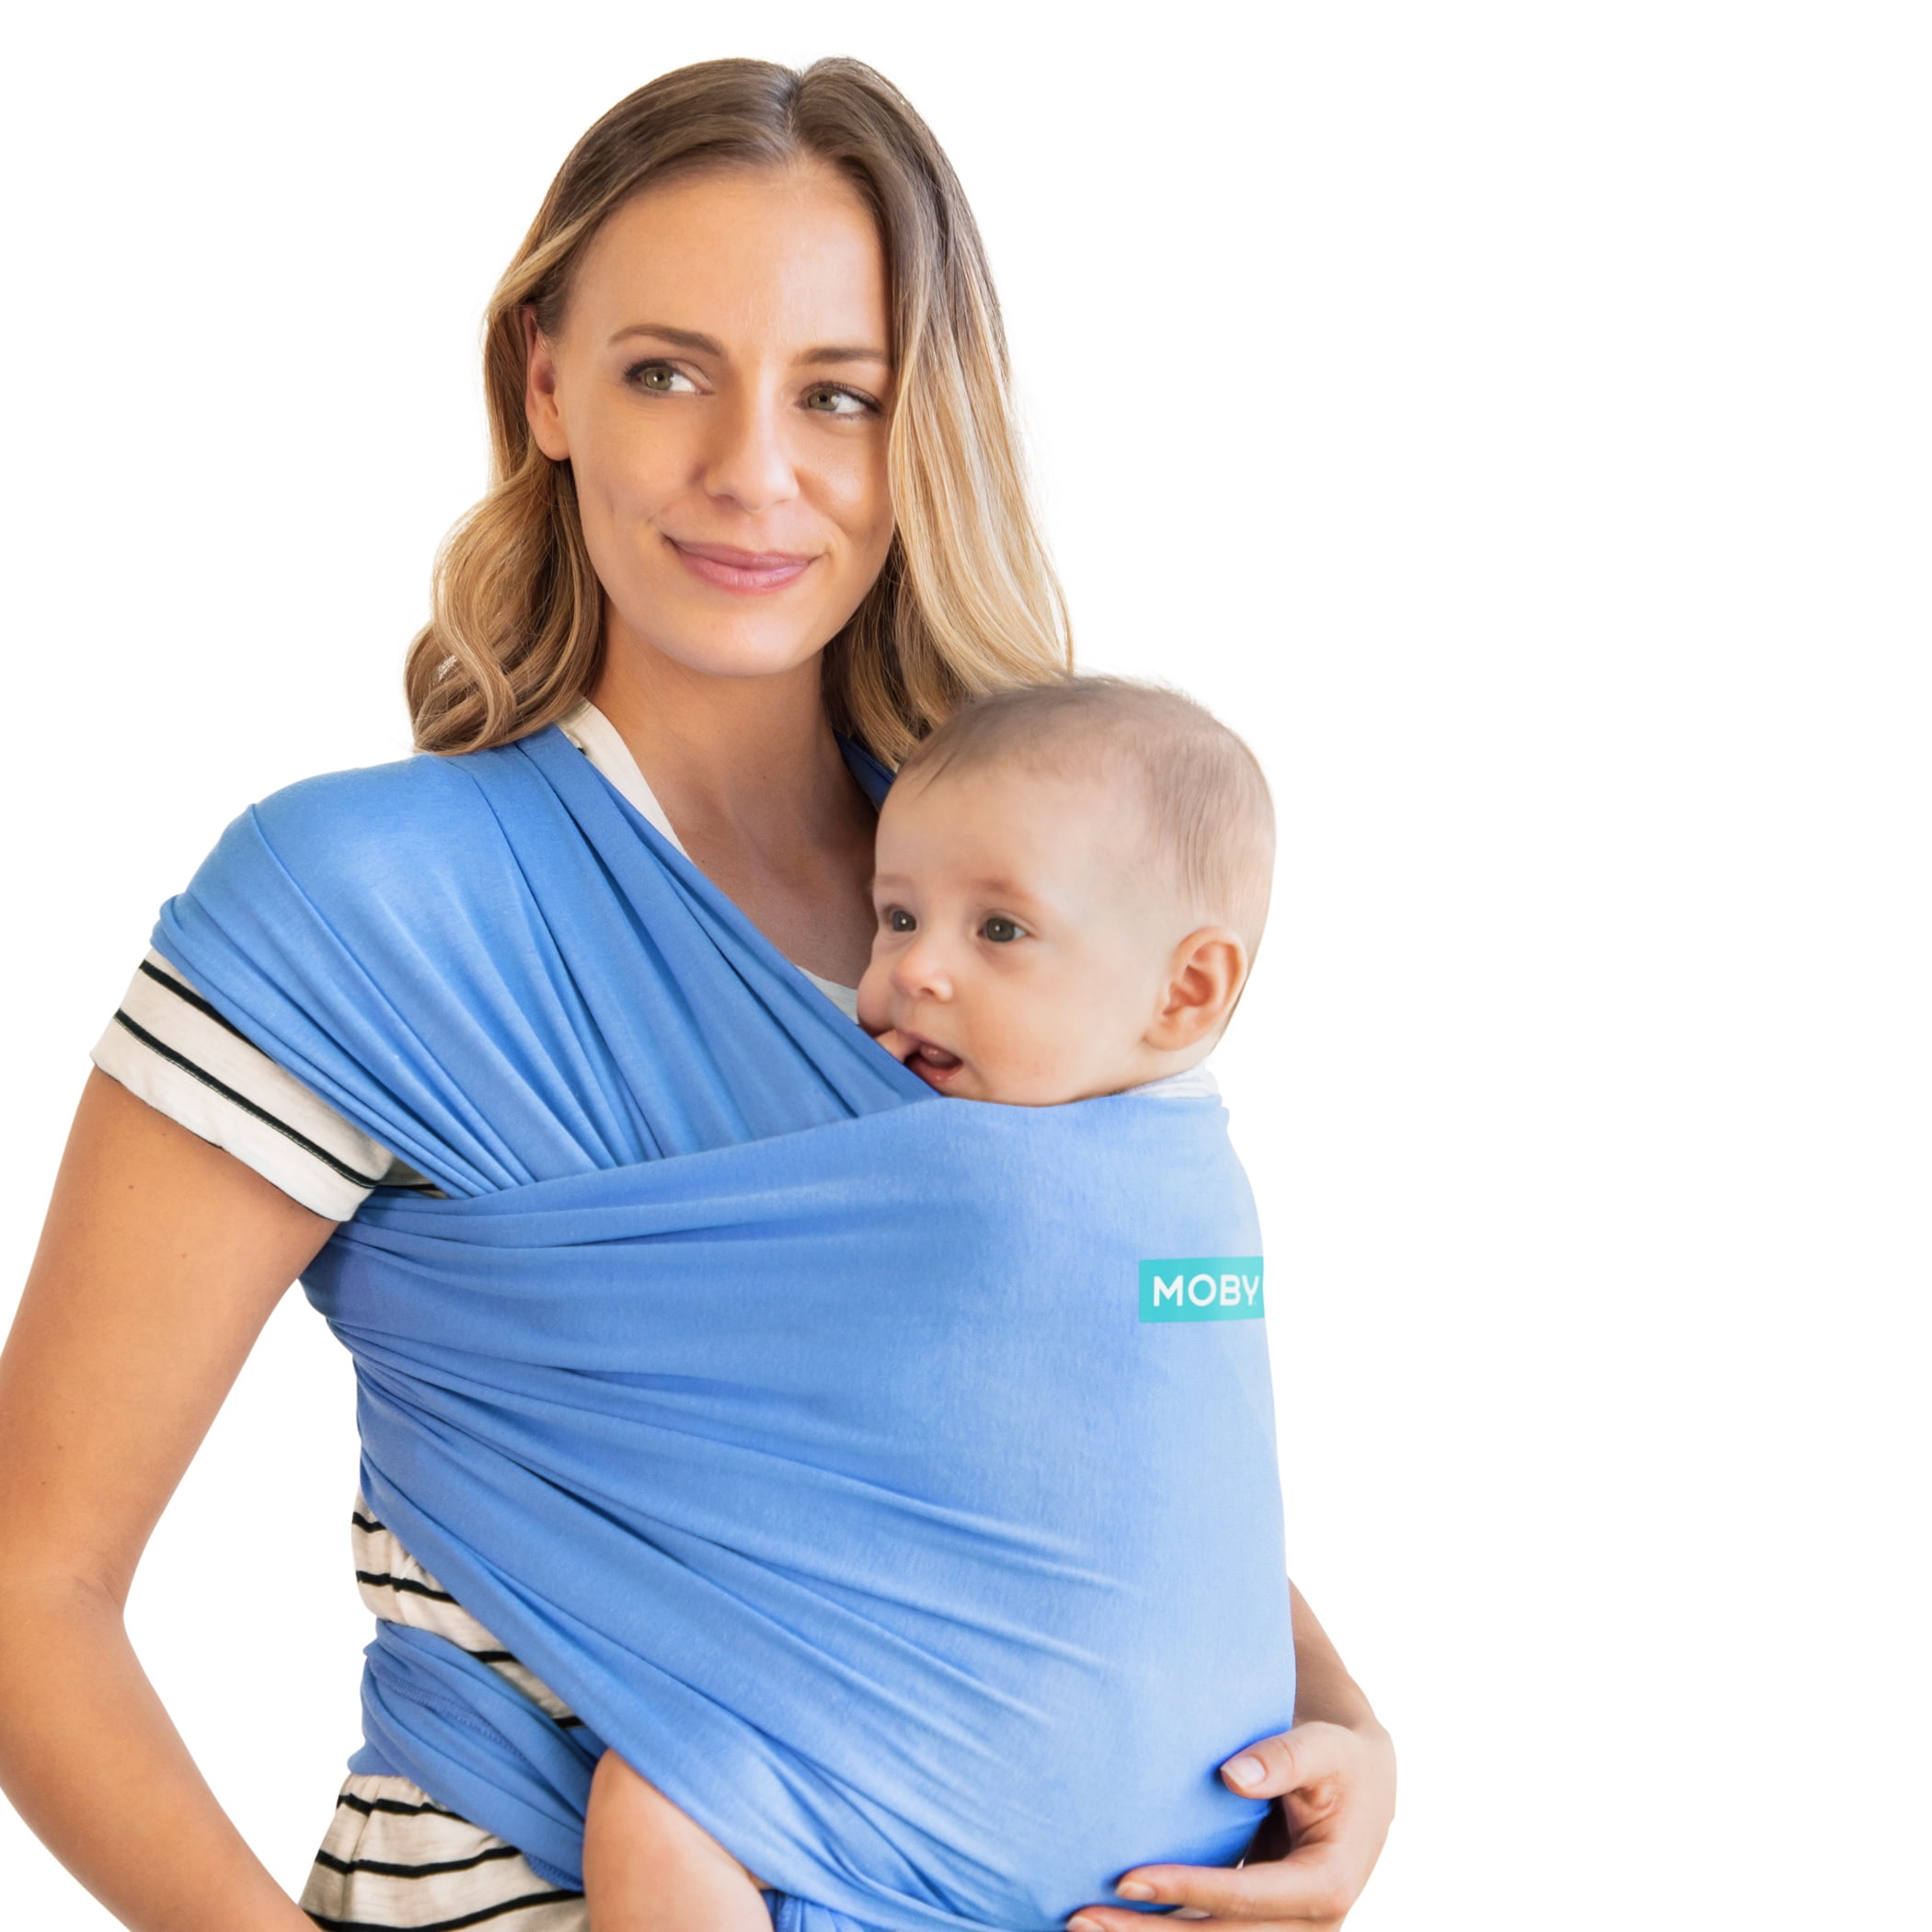 Infant and Child Sling Simple PreWrapped Holder for Babywearing XS Baby K’tan Print Baby Wrap Carrier Carry Newborn up to 35 lbs Plaid Grey W Dress 2-4 / M Jacket up to 36 No Tying or Rings